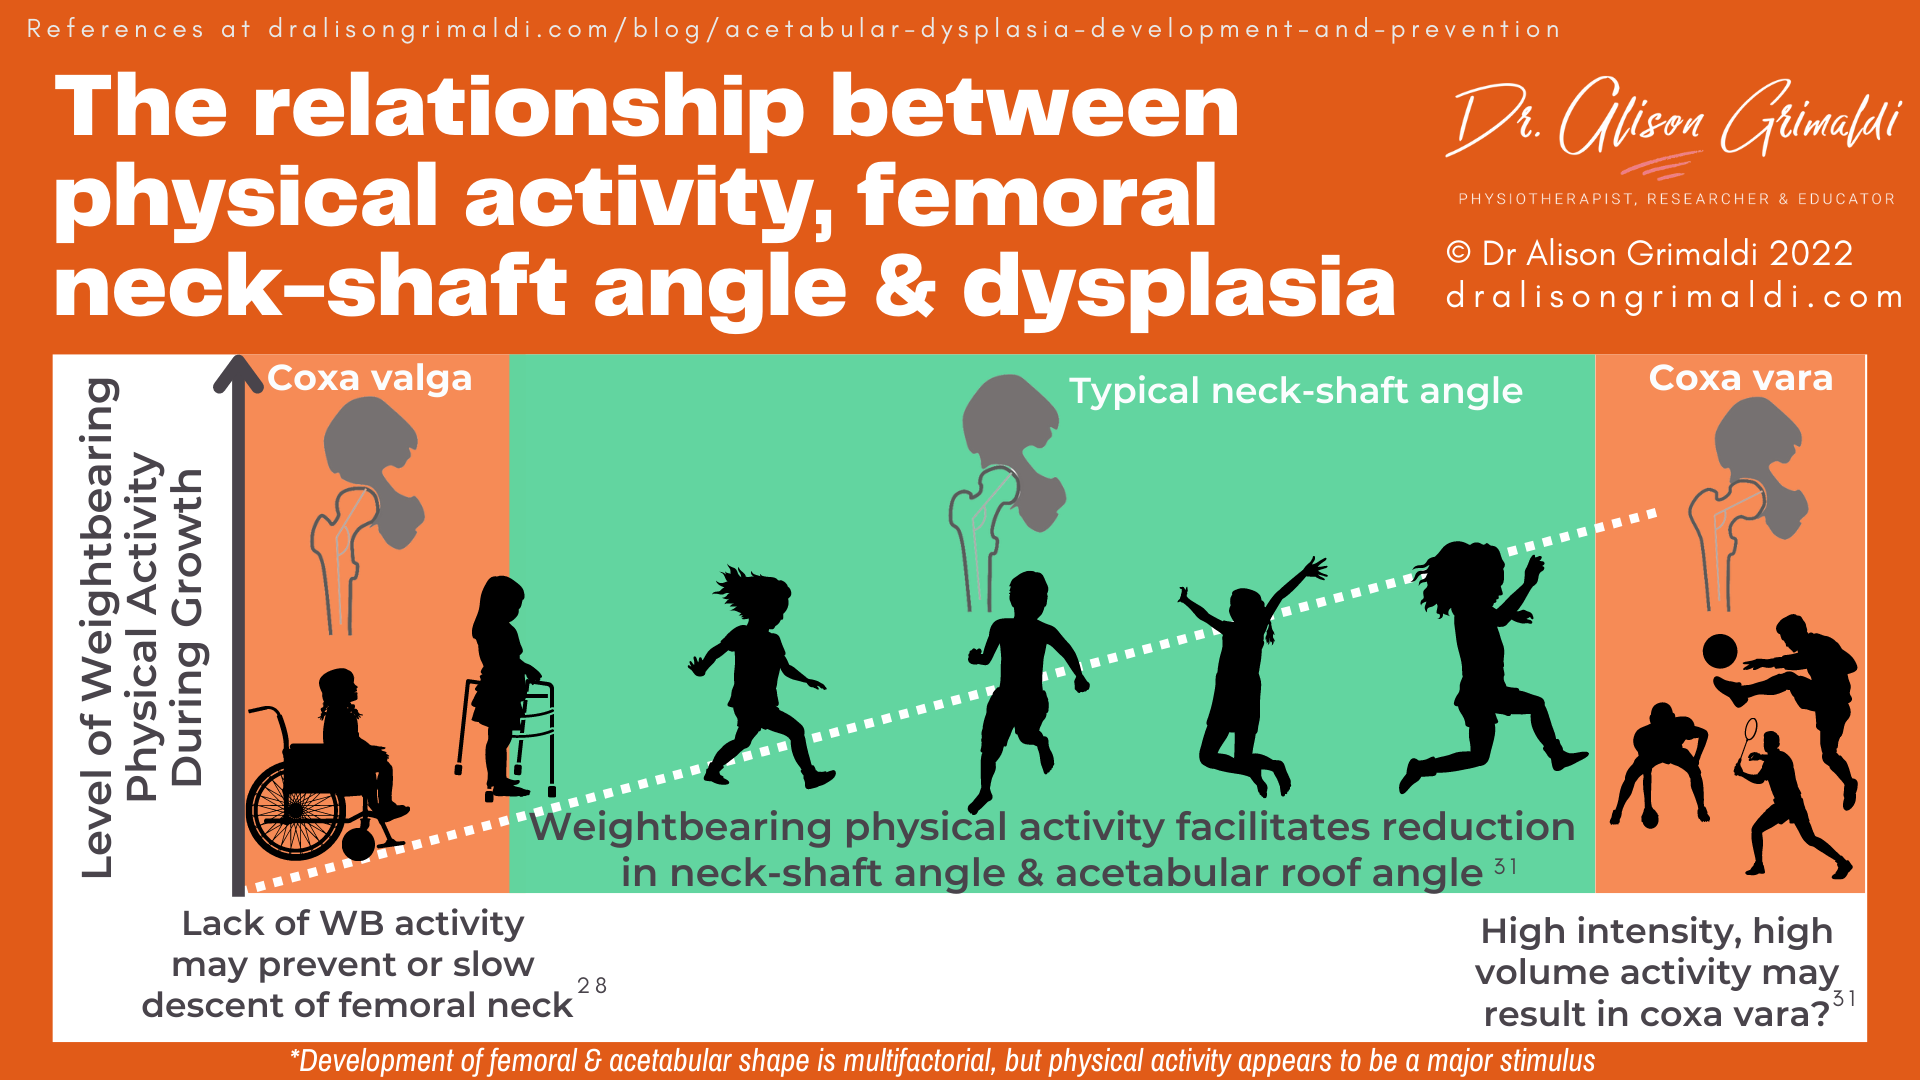 The relationship between physical activity, femoral neck-shaft angle & dysplasia